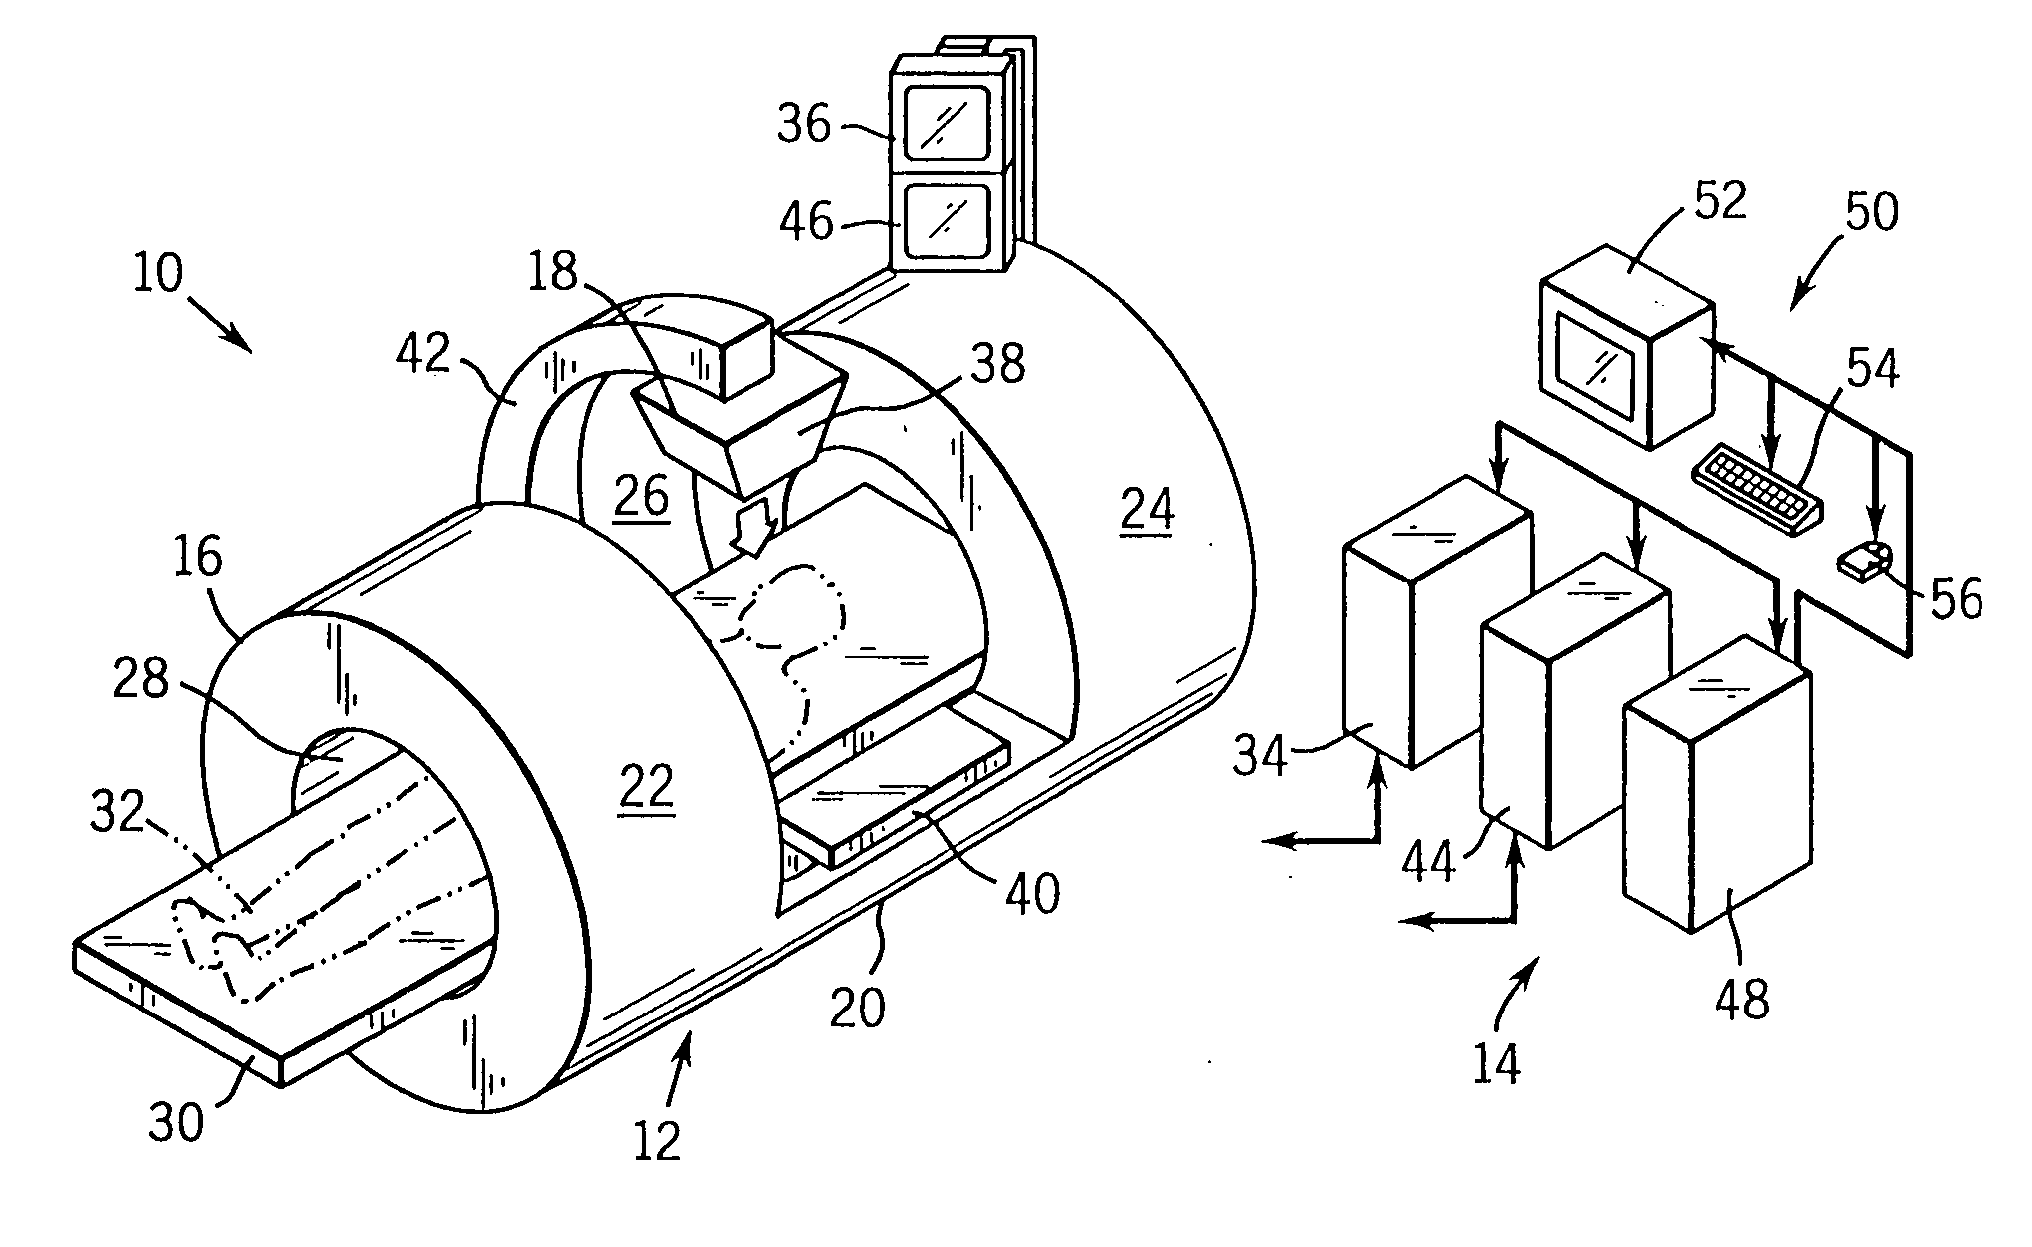 Integrated multi-modality imaging system and method